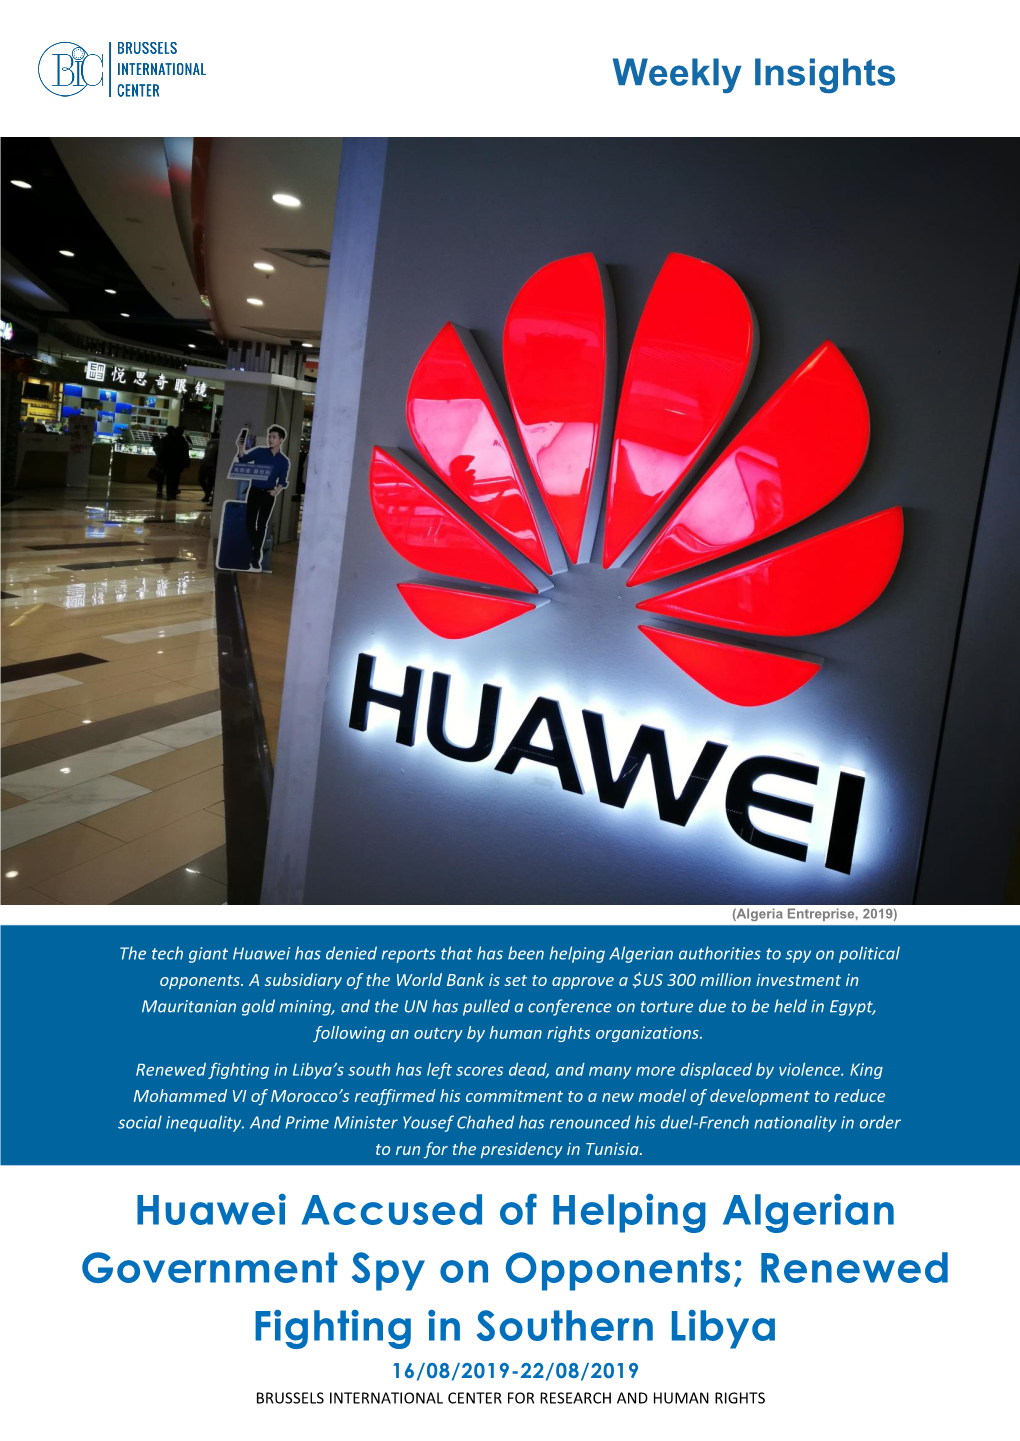 Huawei Accused of Helping Algerian Government Spy On